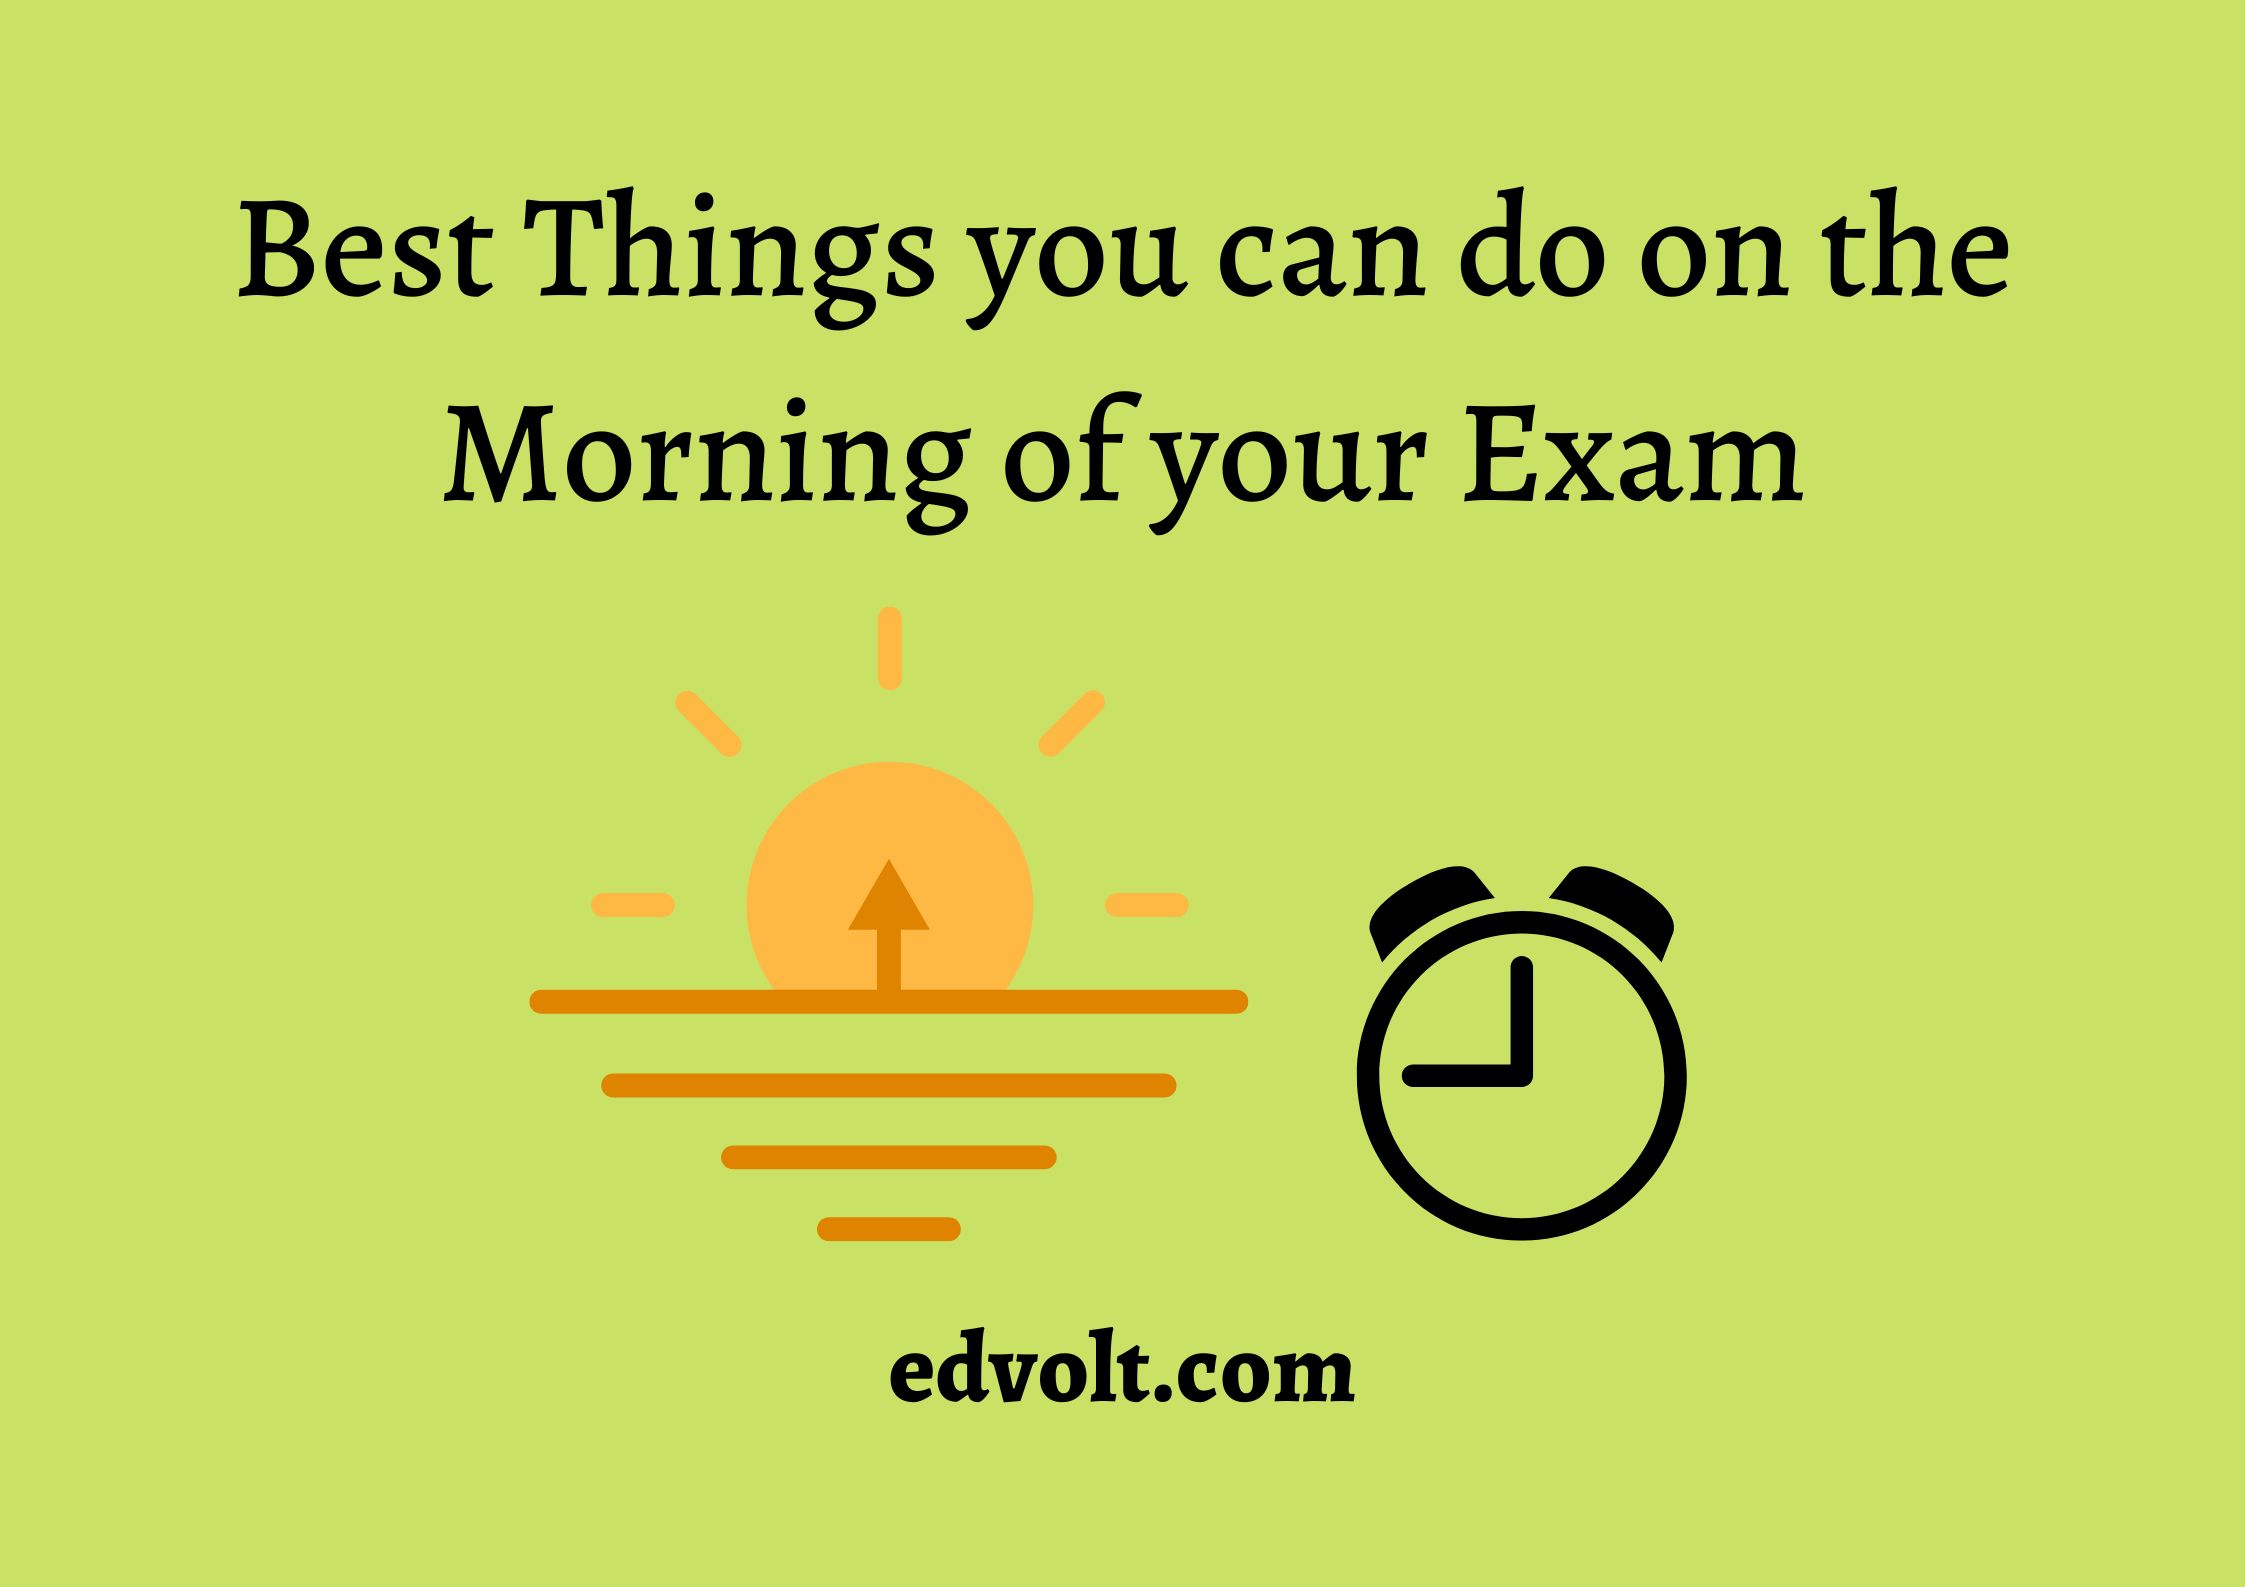 Best Things you can do on the Morning of Your Exam